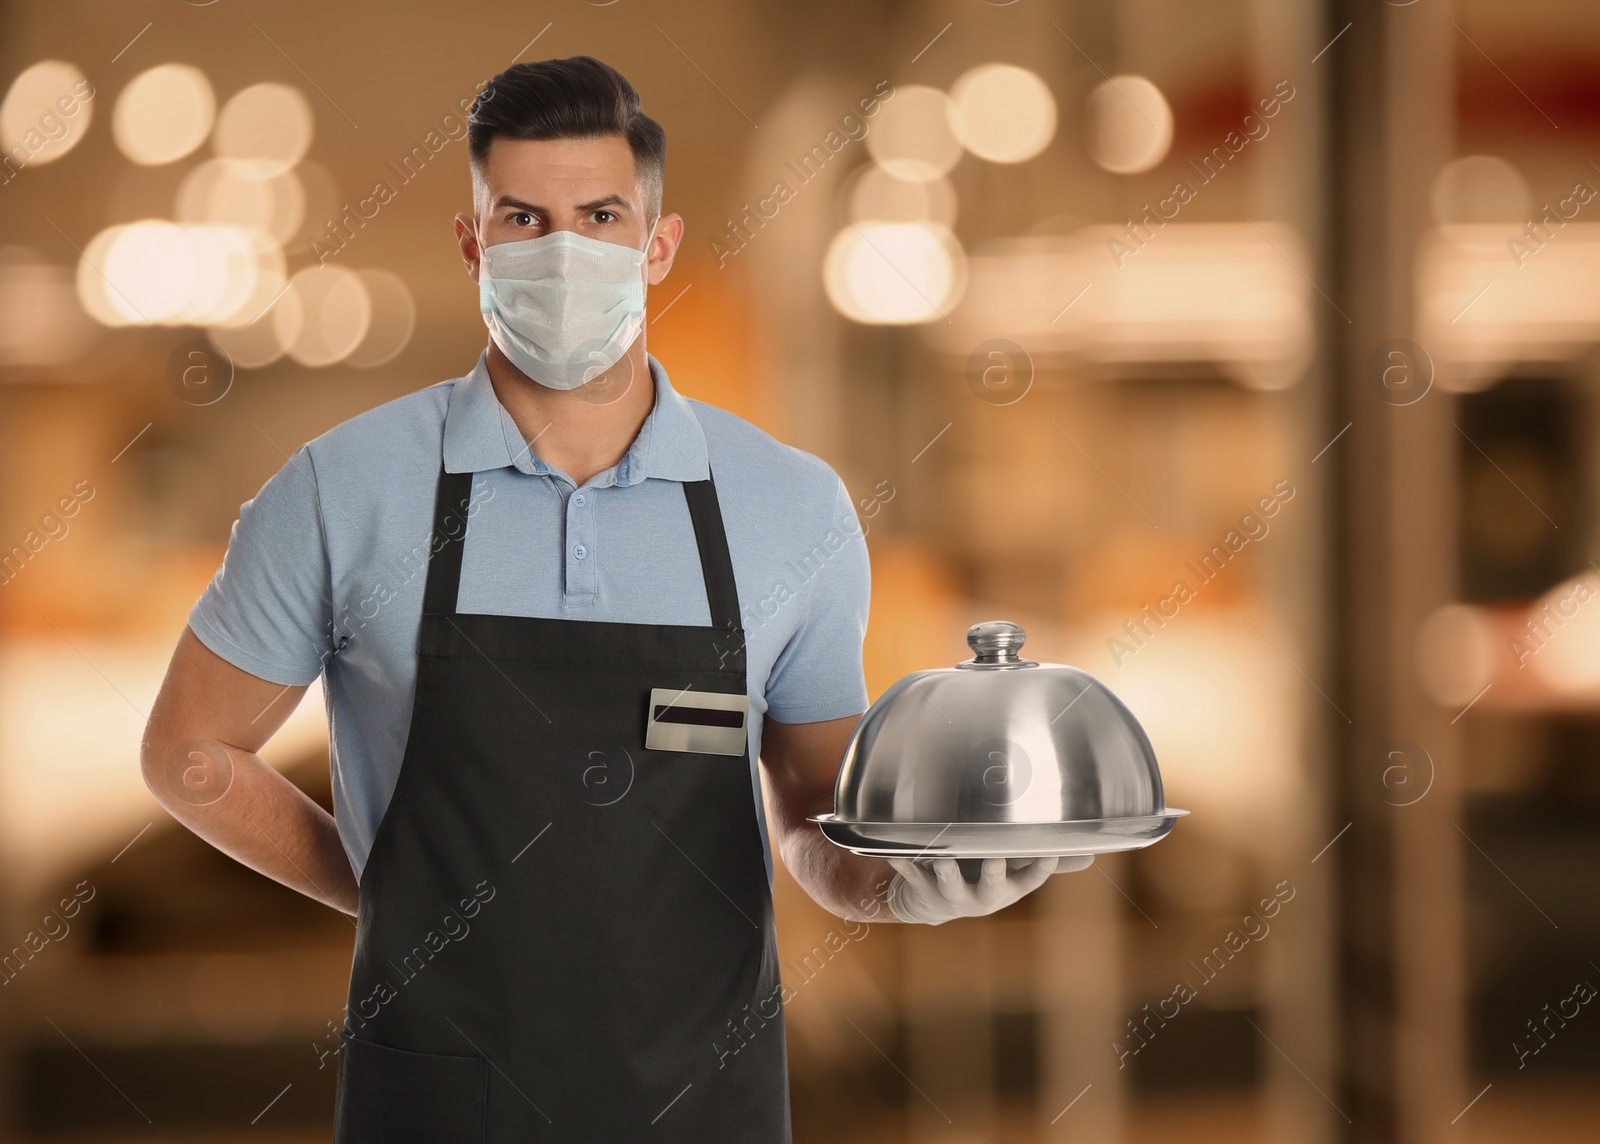 Image of Waiter in medical face mask holding tray with lid in restaurant